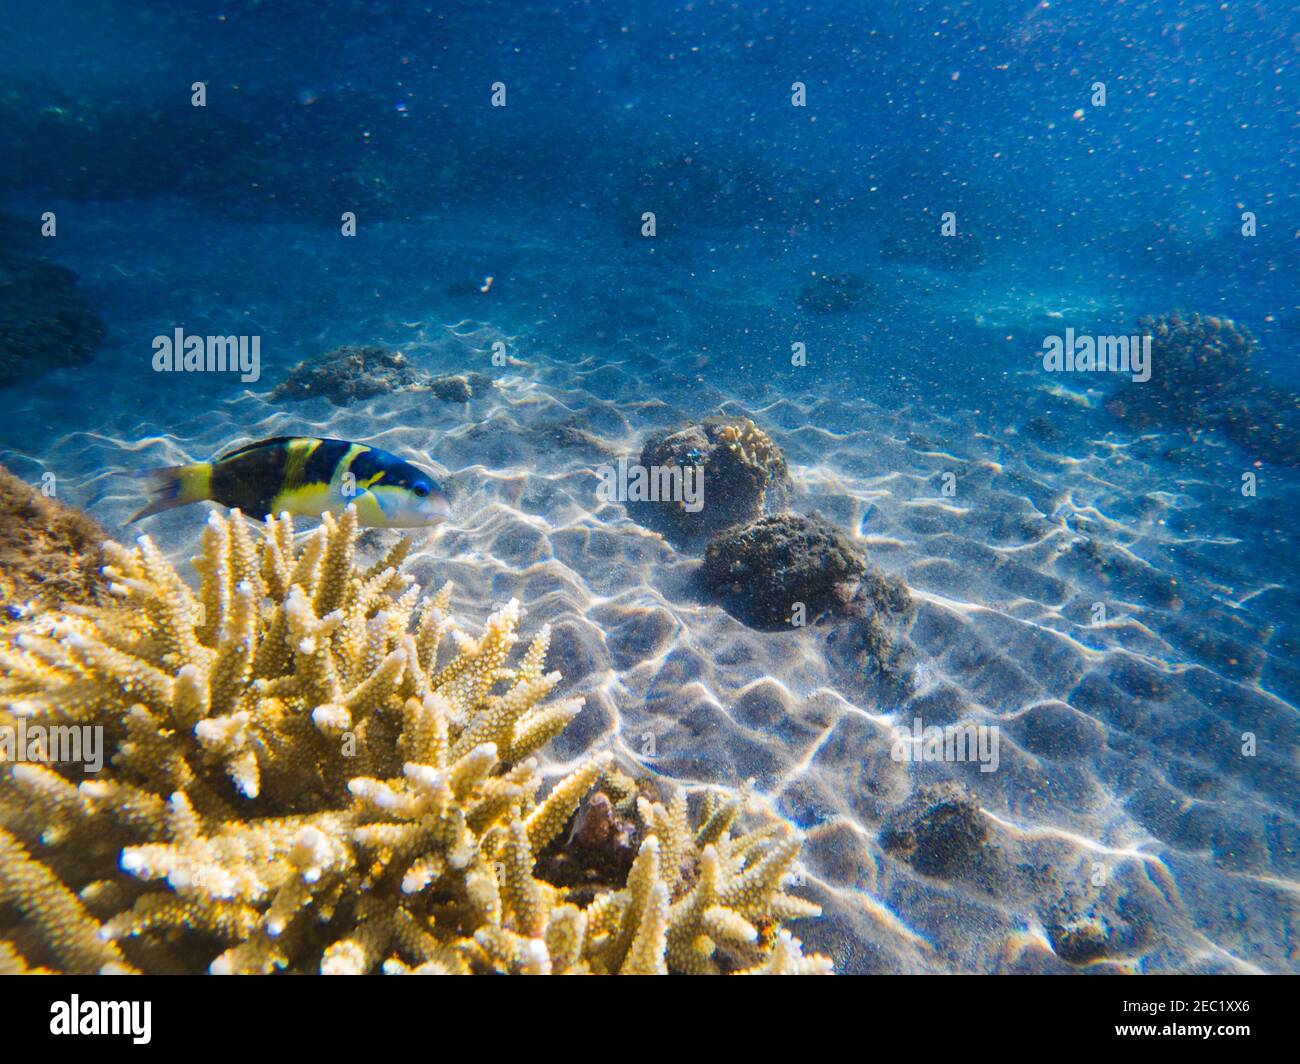 Tropical fish in spiky coral. Exotic island shore shallow water. Tropical seashore landscape underwater photo. Coral reef animal. Sea nature. Sea fish Stock Photo